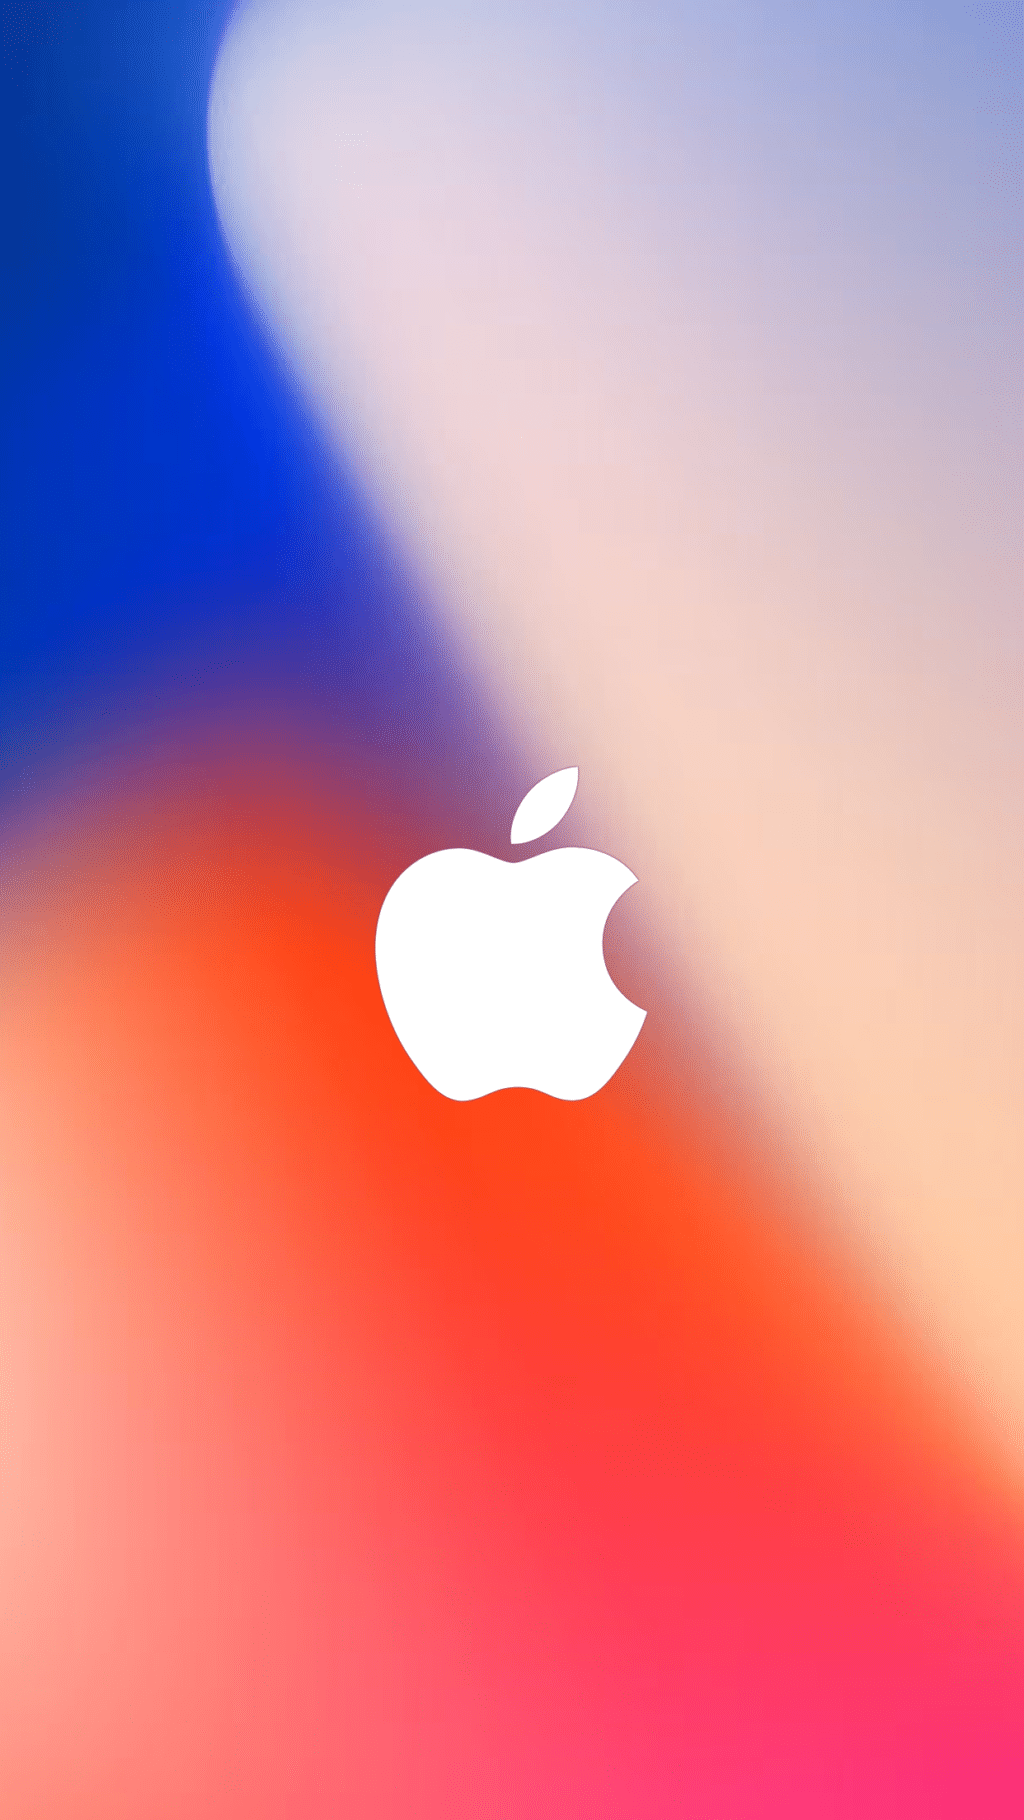 Apple Iphone 8 Wallpapers Top Free Apple Iphone 8 Backgrounds Wallpaperaccess